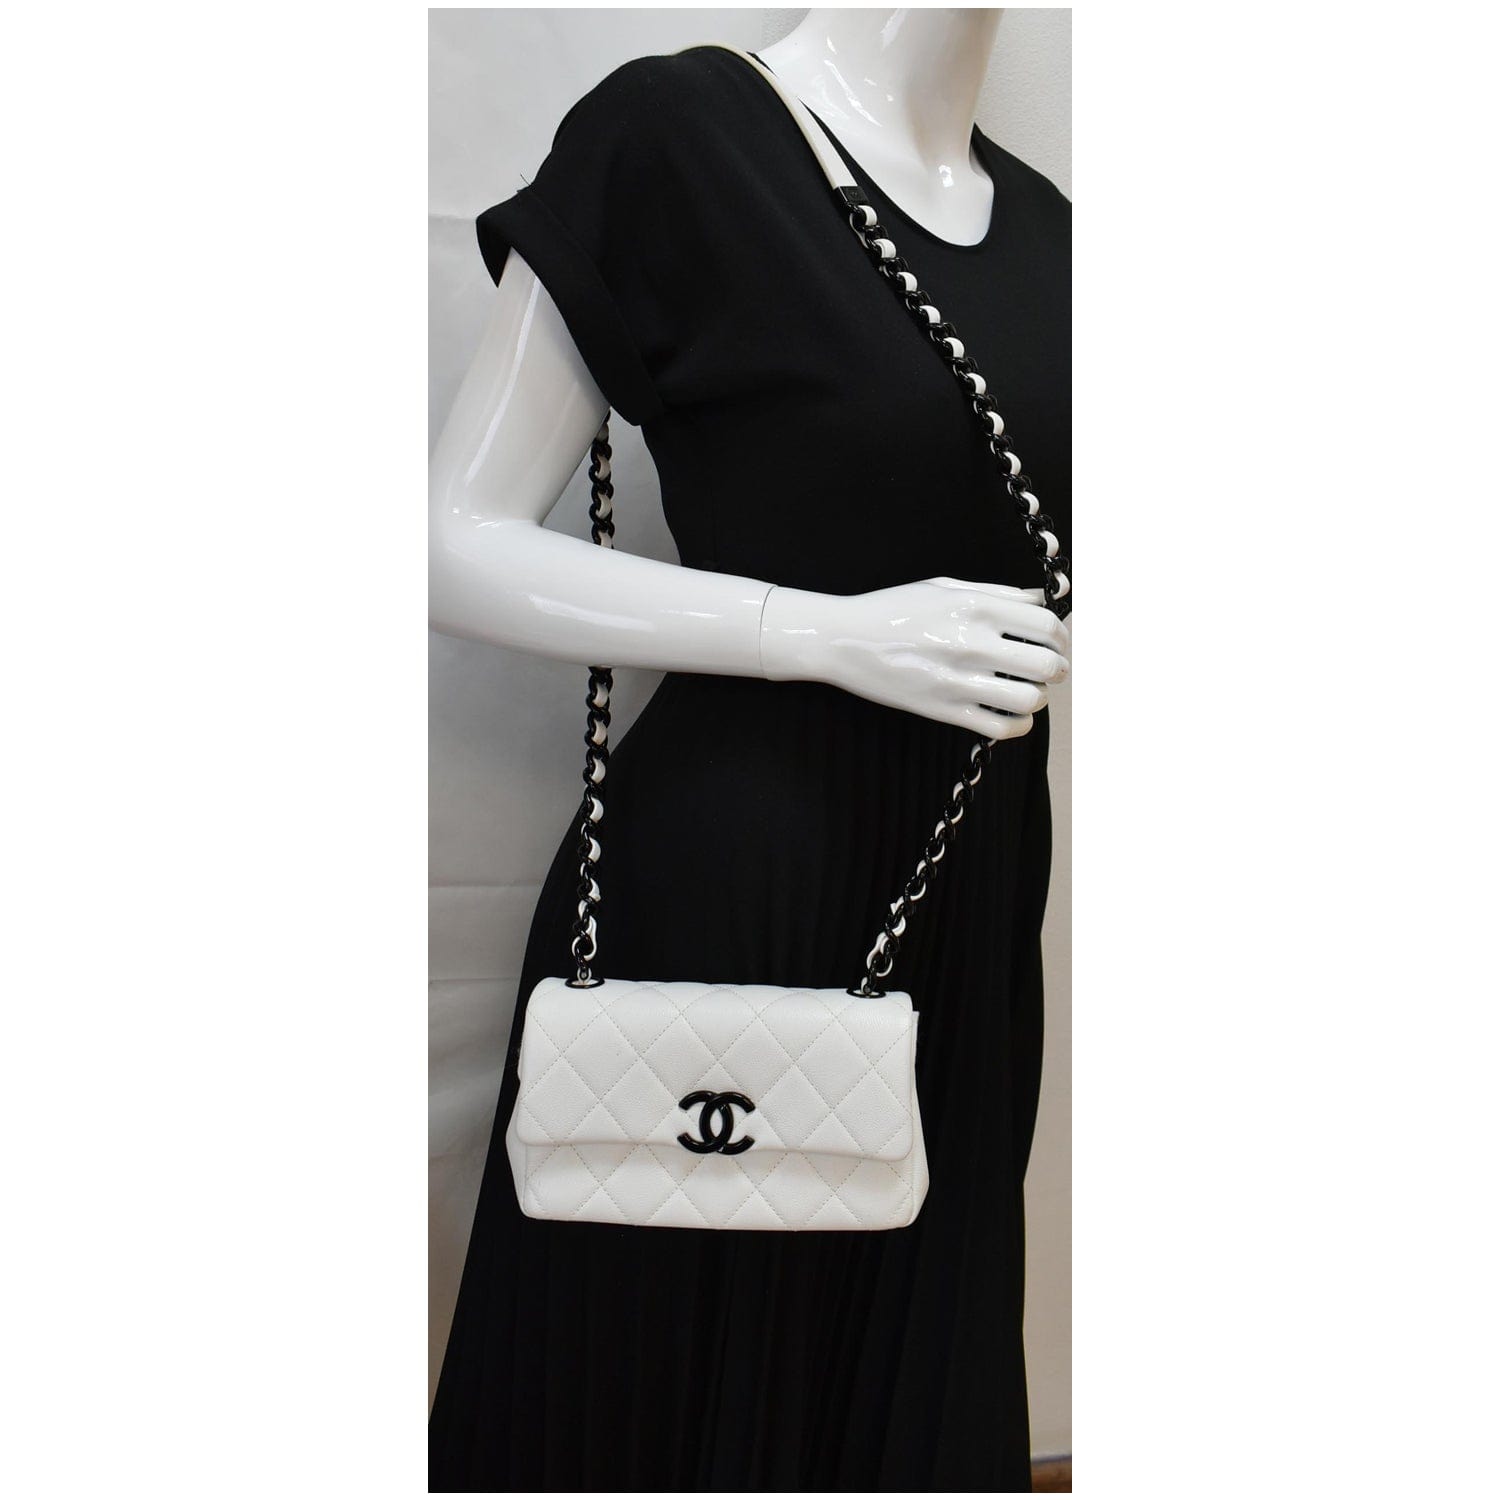 chanel bag white and black